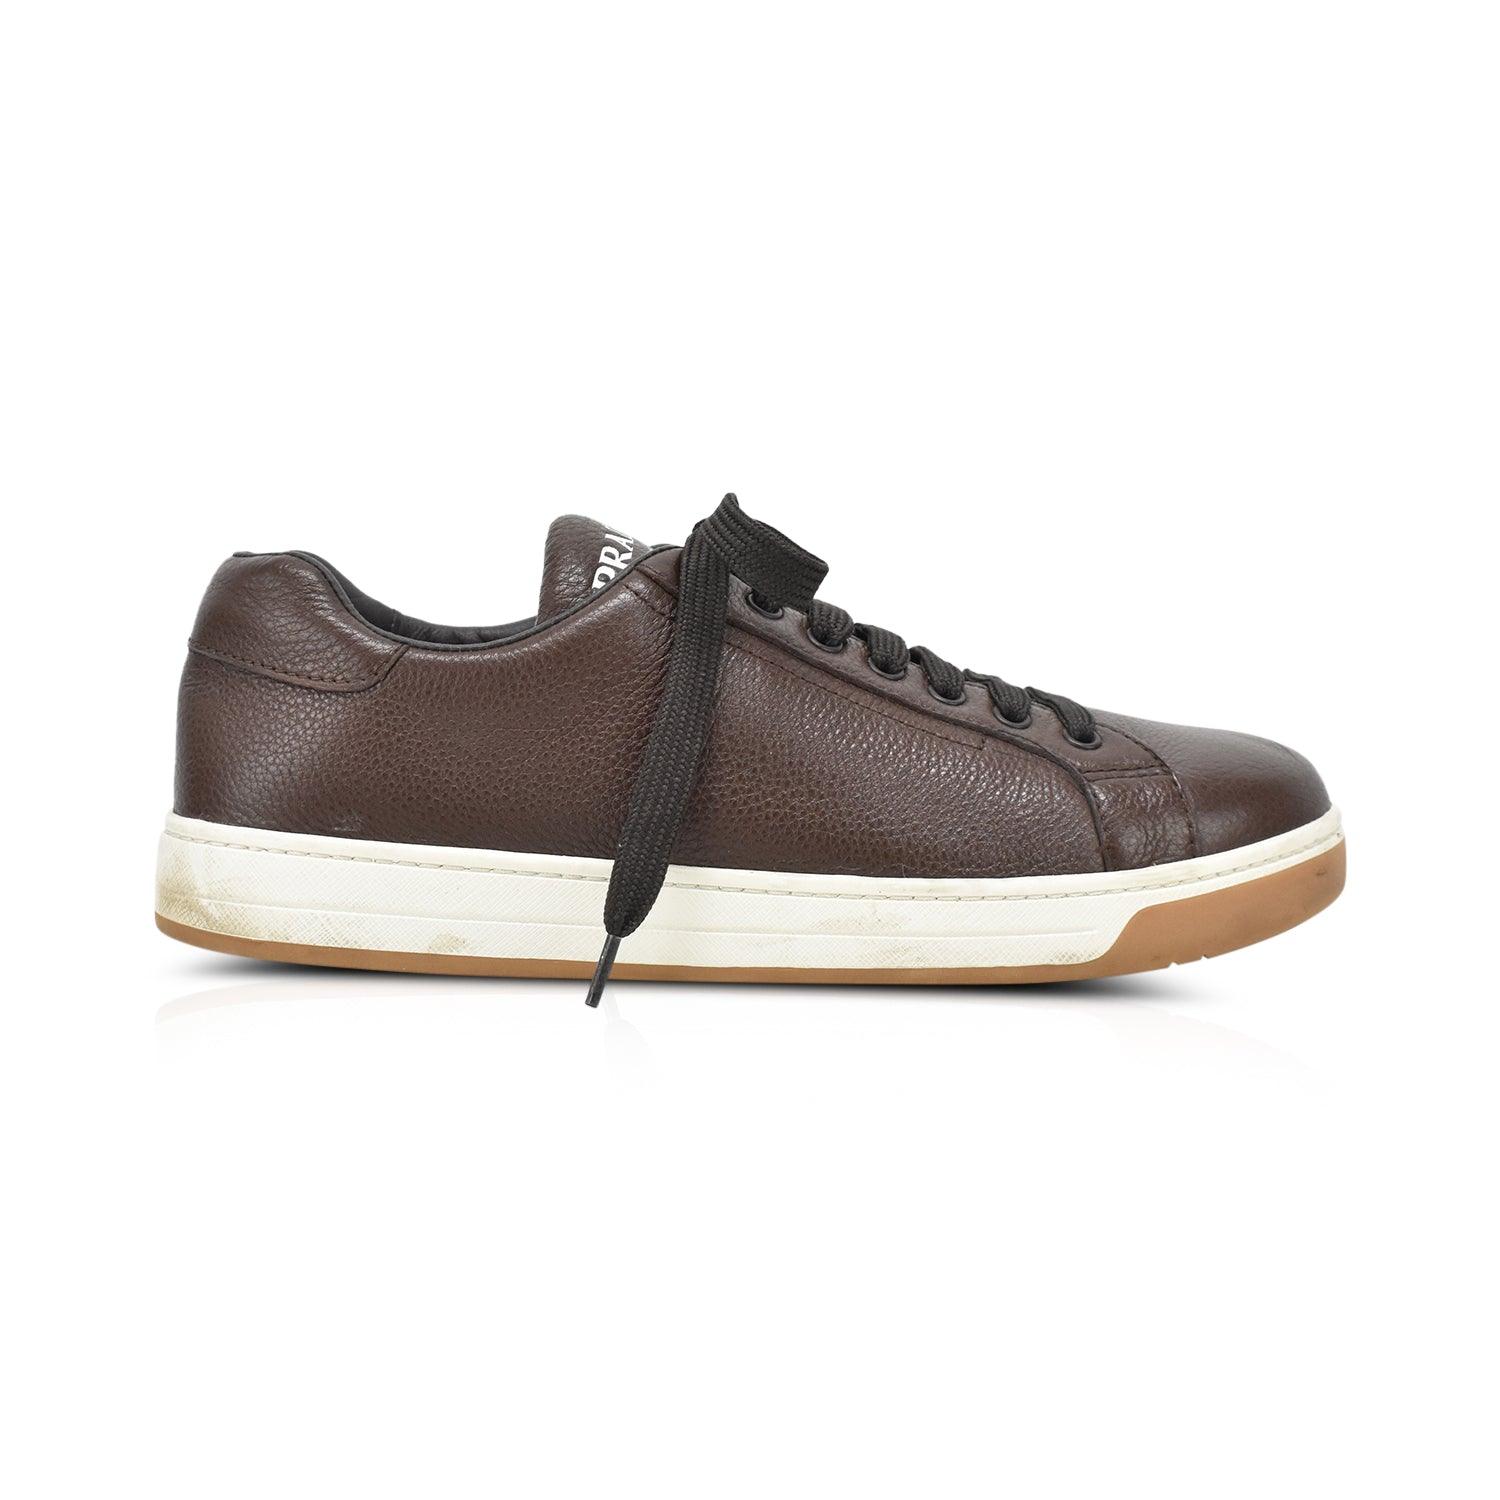 Prada Sneakers - Men's 7 - Fashionably Yours